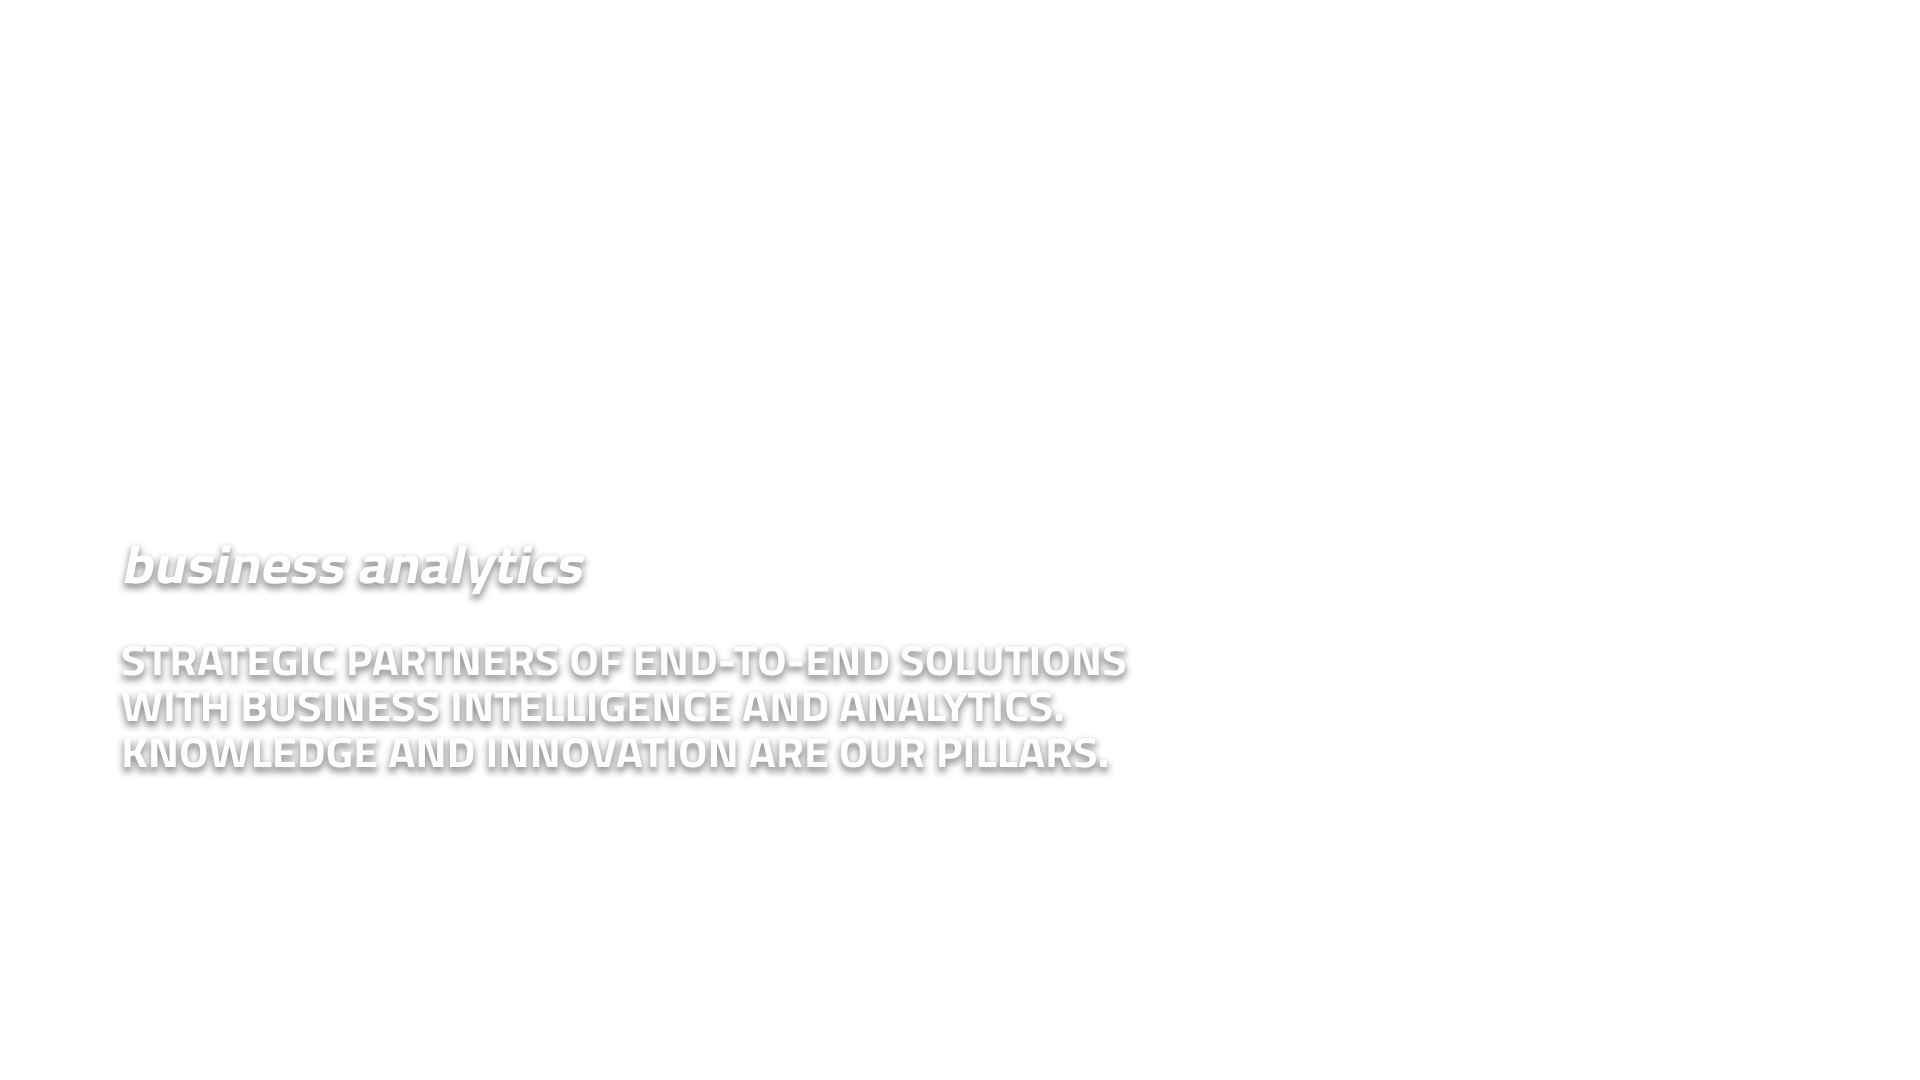 More than 15 years innovating with Business Analytics